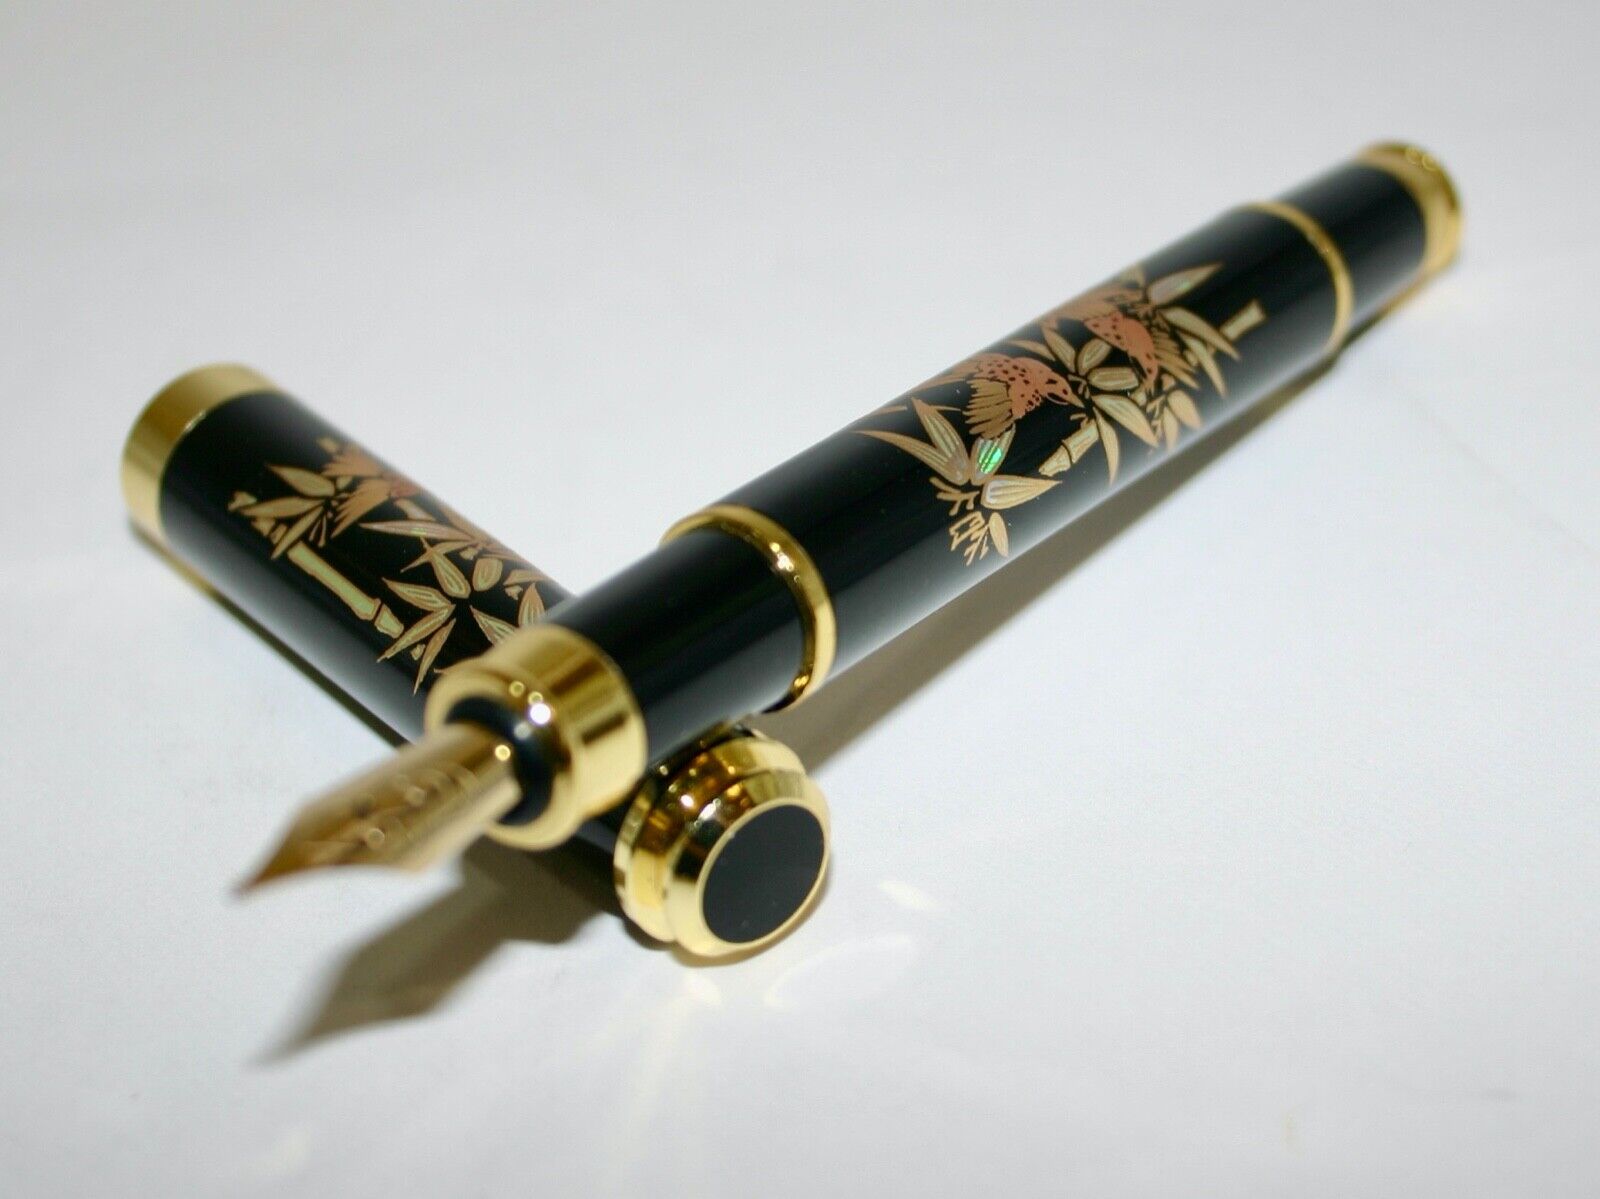 Original Fountain Pen Has A Modern Maki-e Of Sparrow On Bamboo Forest With Box